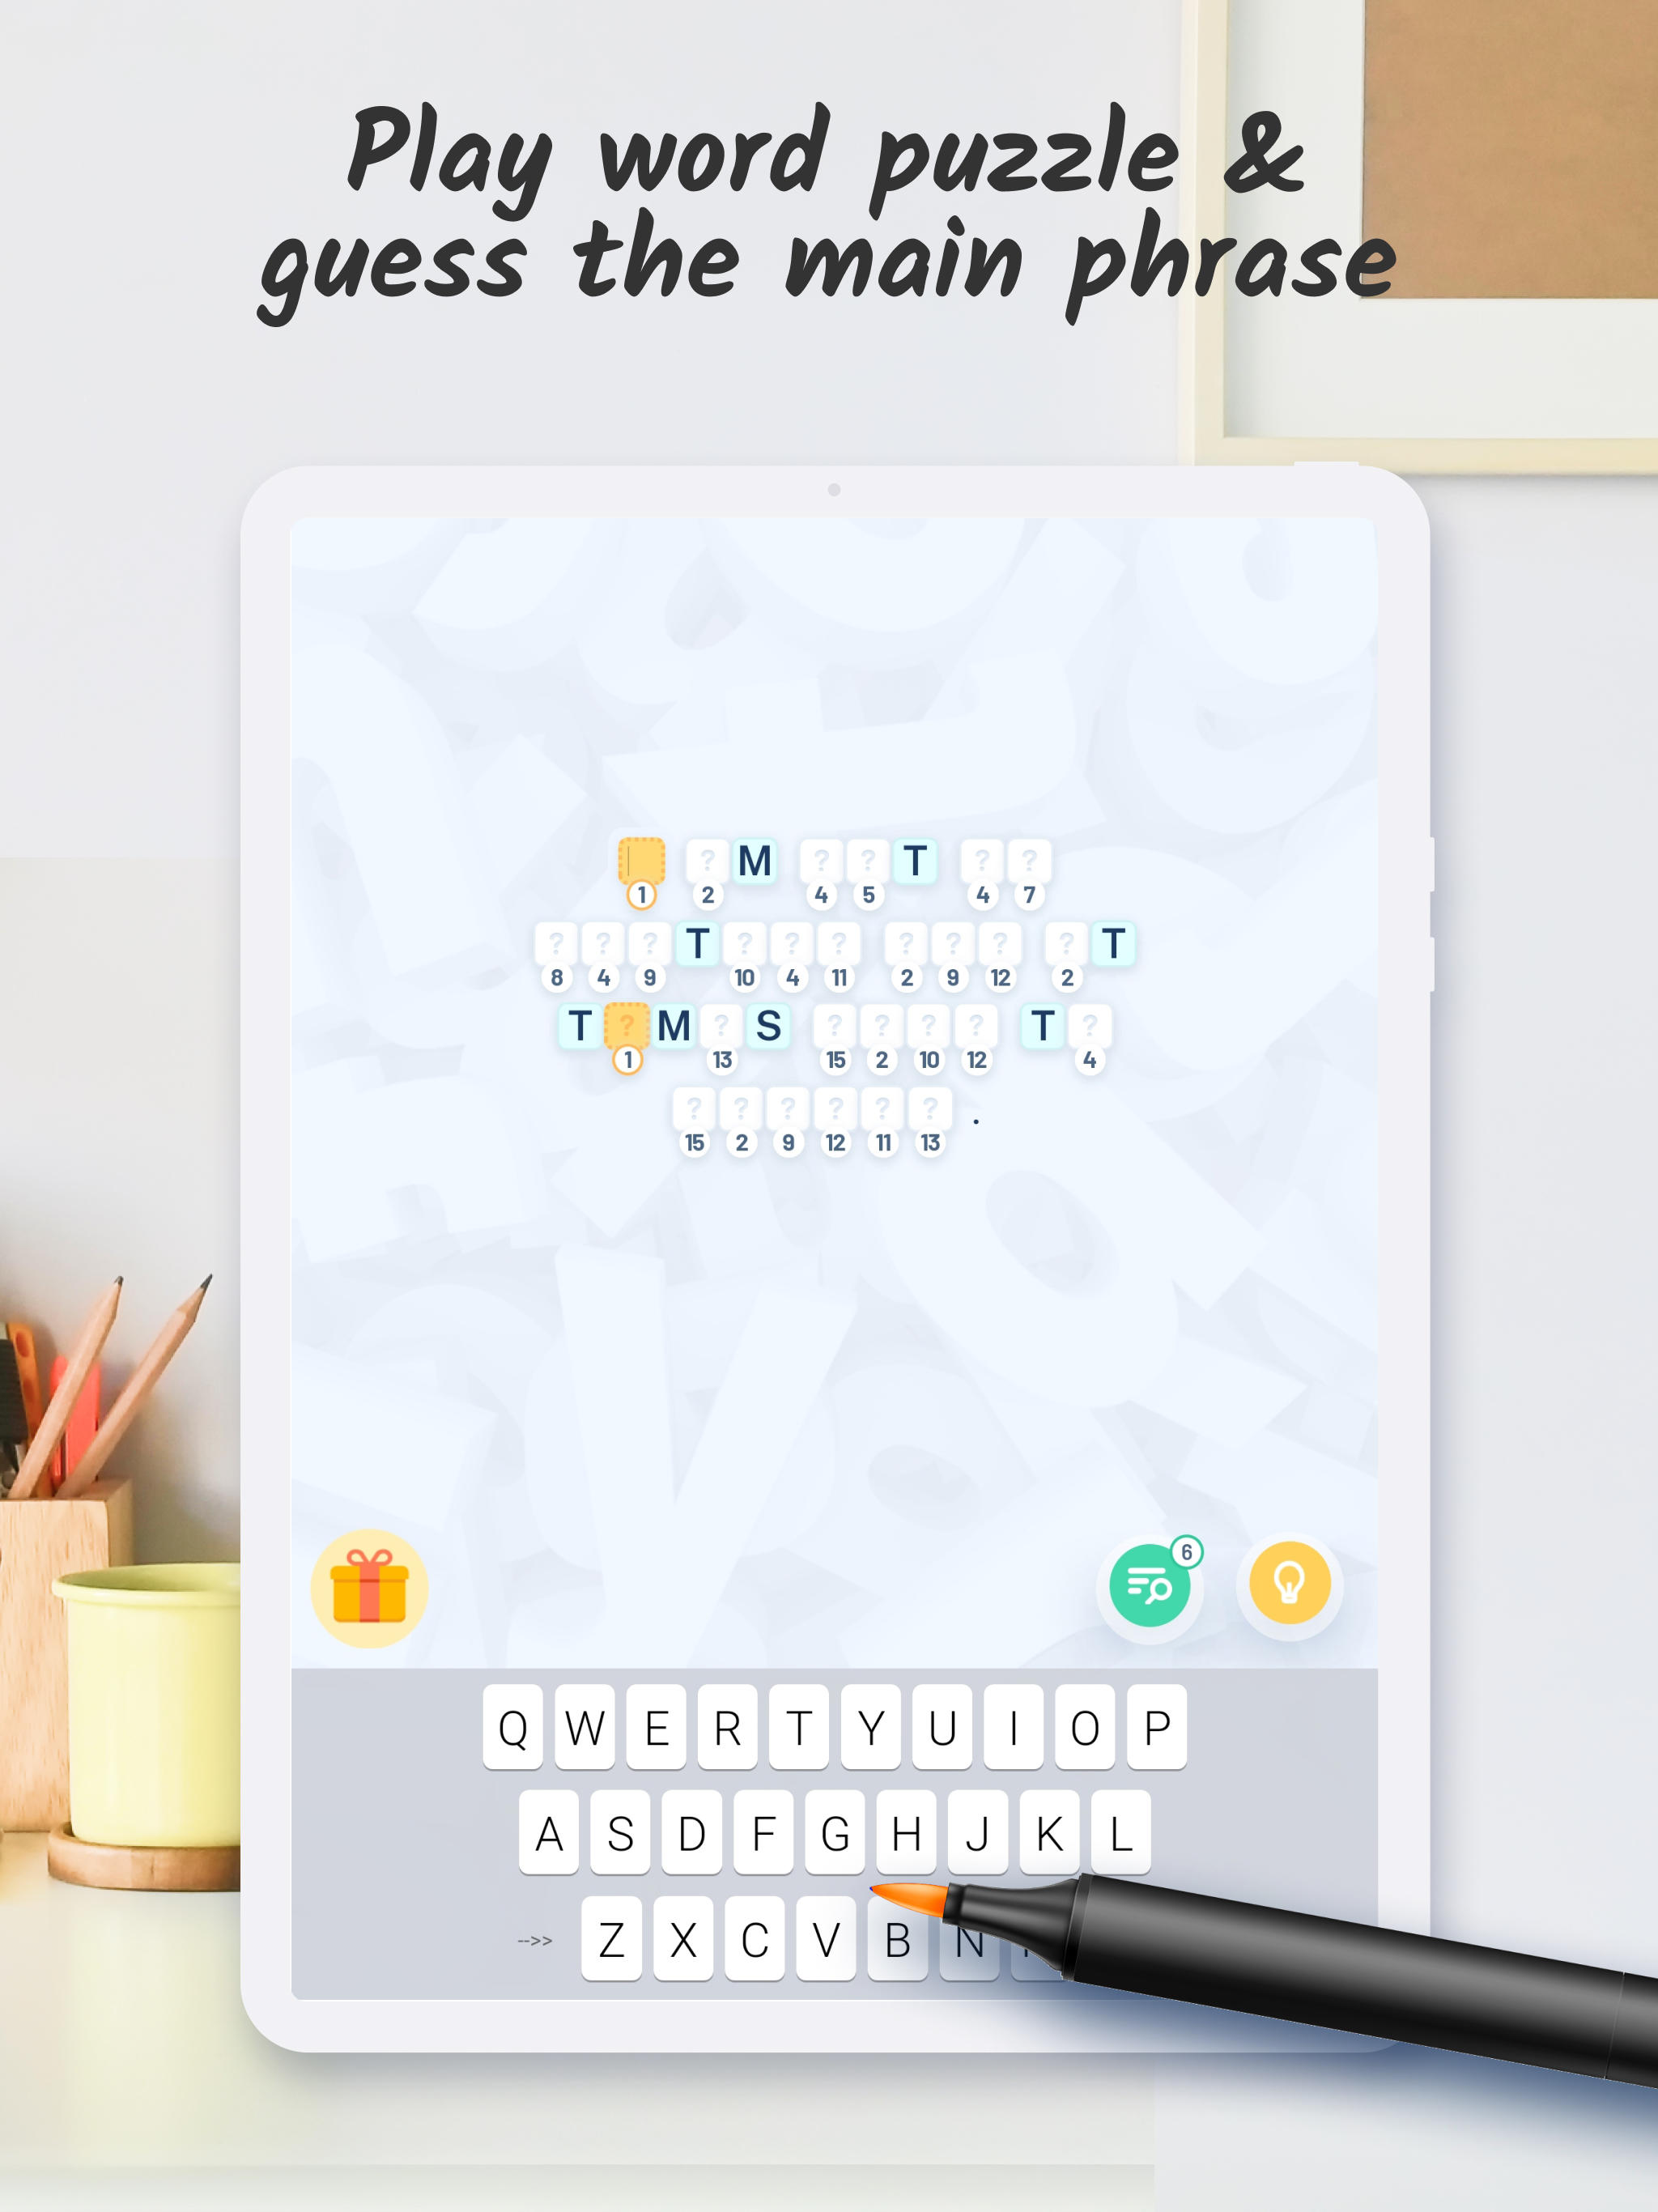 CROSSWORD CRYPTOGRAM - Puzzle - Apps on Google Play